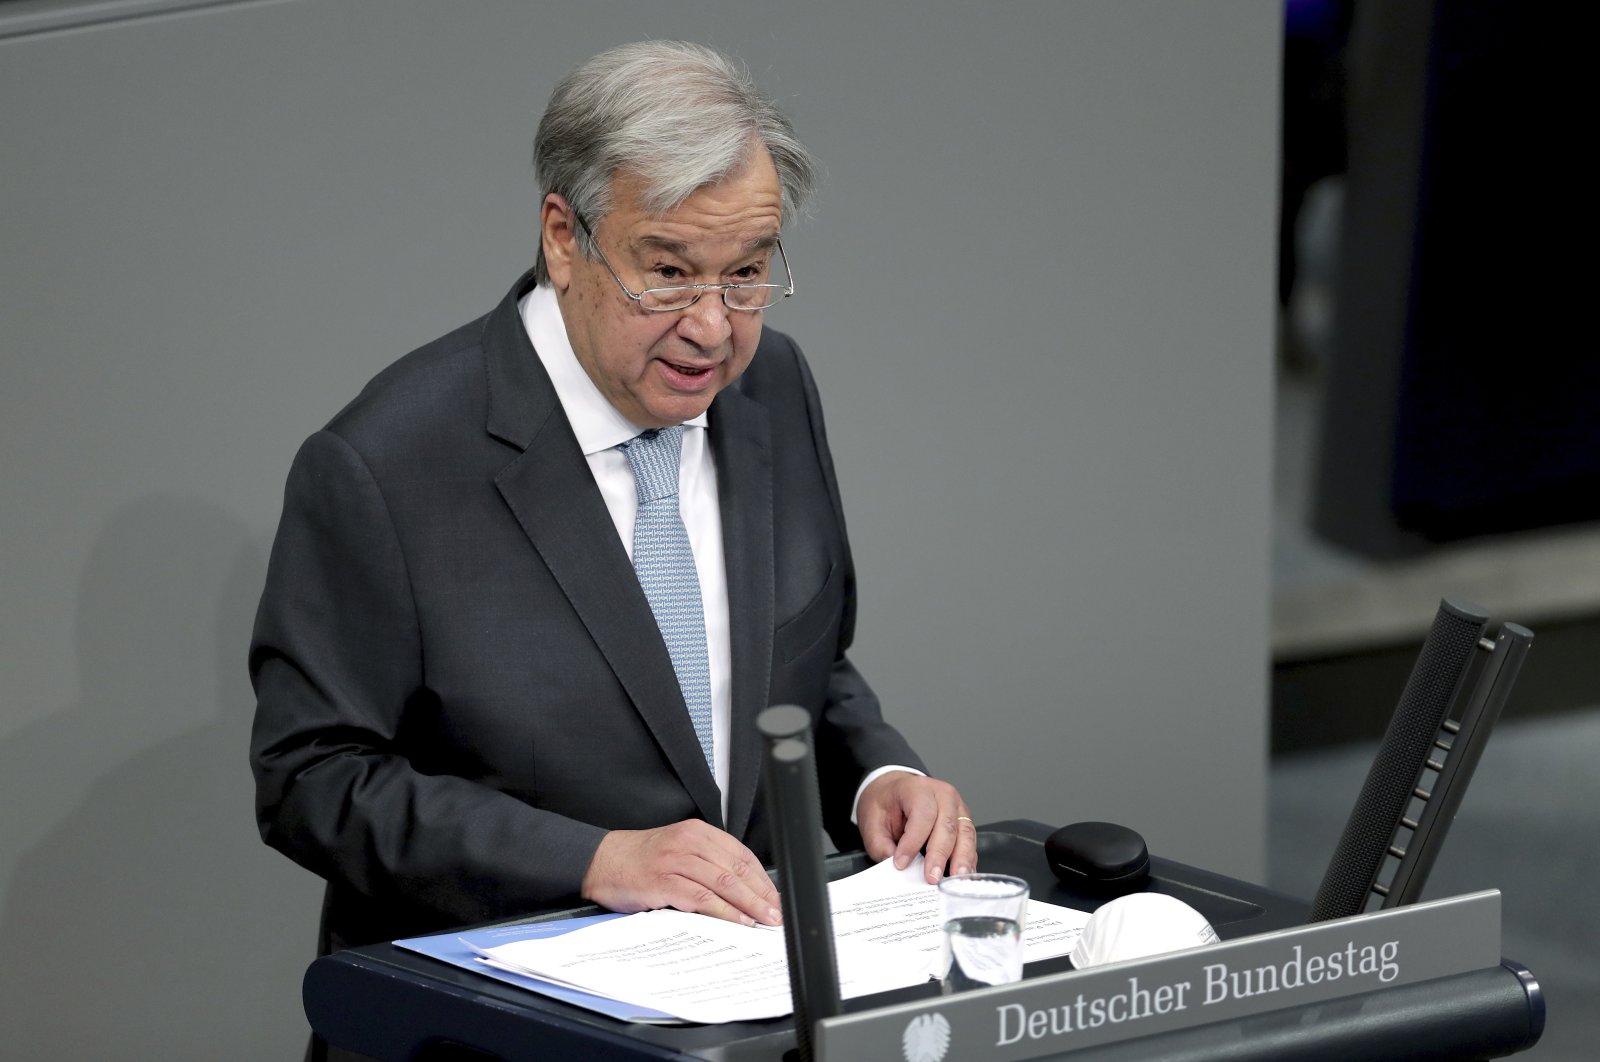 U.N. Secretary-General Antonio Guterres delivers a speech during a meeting of the German federal parliament, Bundestag, at the Reichstag building in Berlin, Germany, Dec. 18, 2020. (AP Photo)